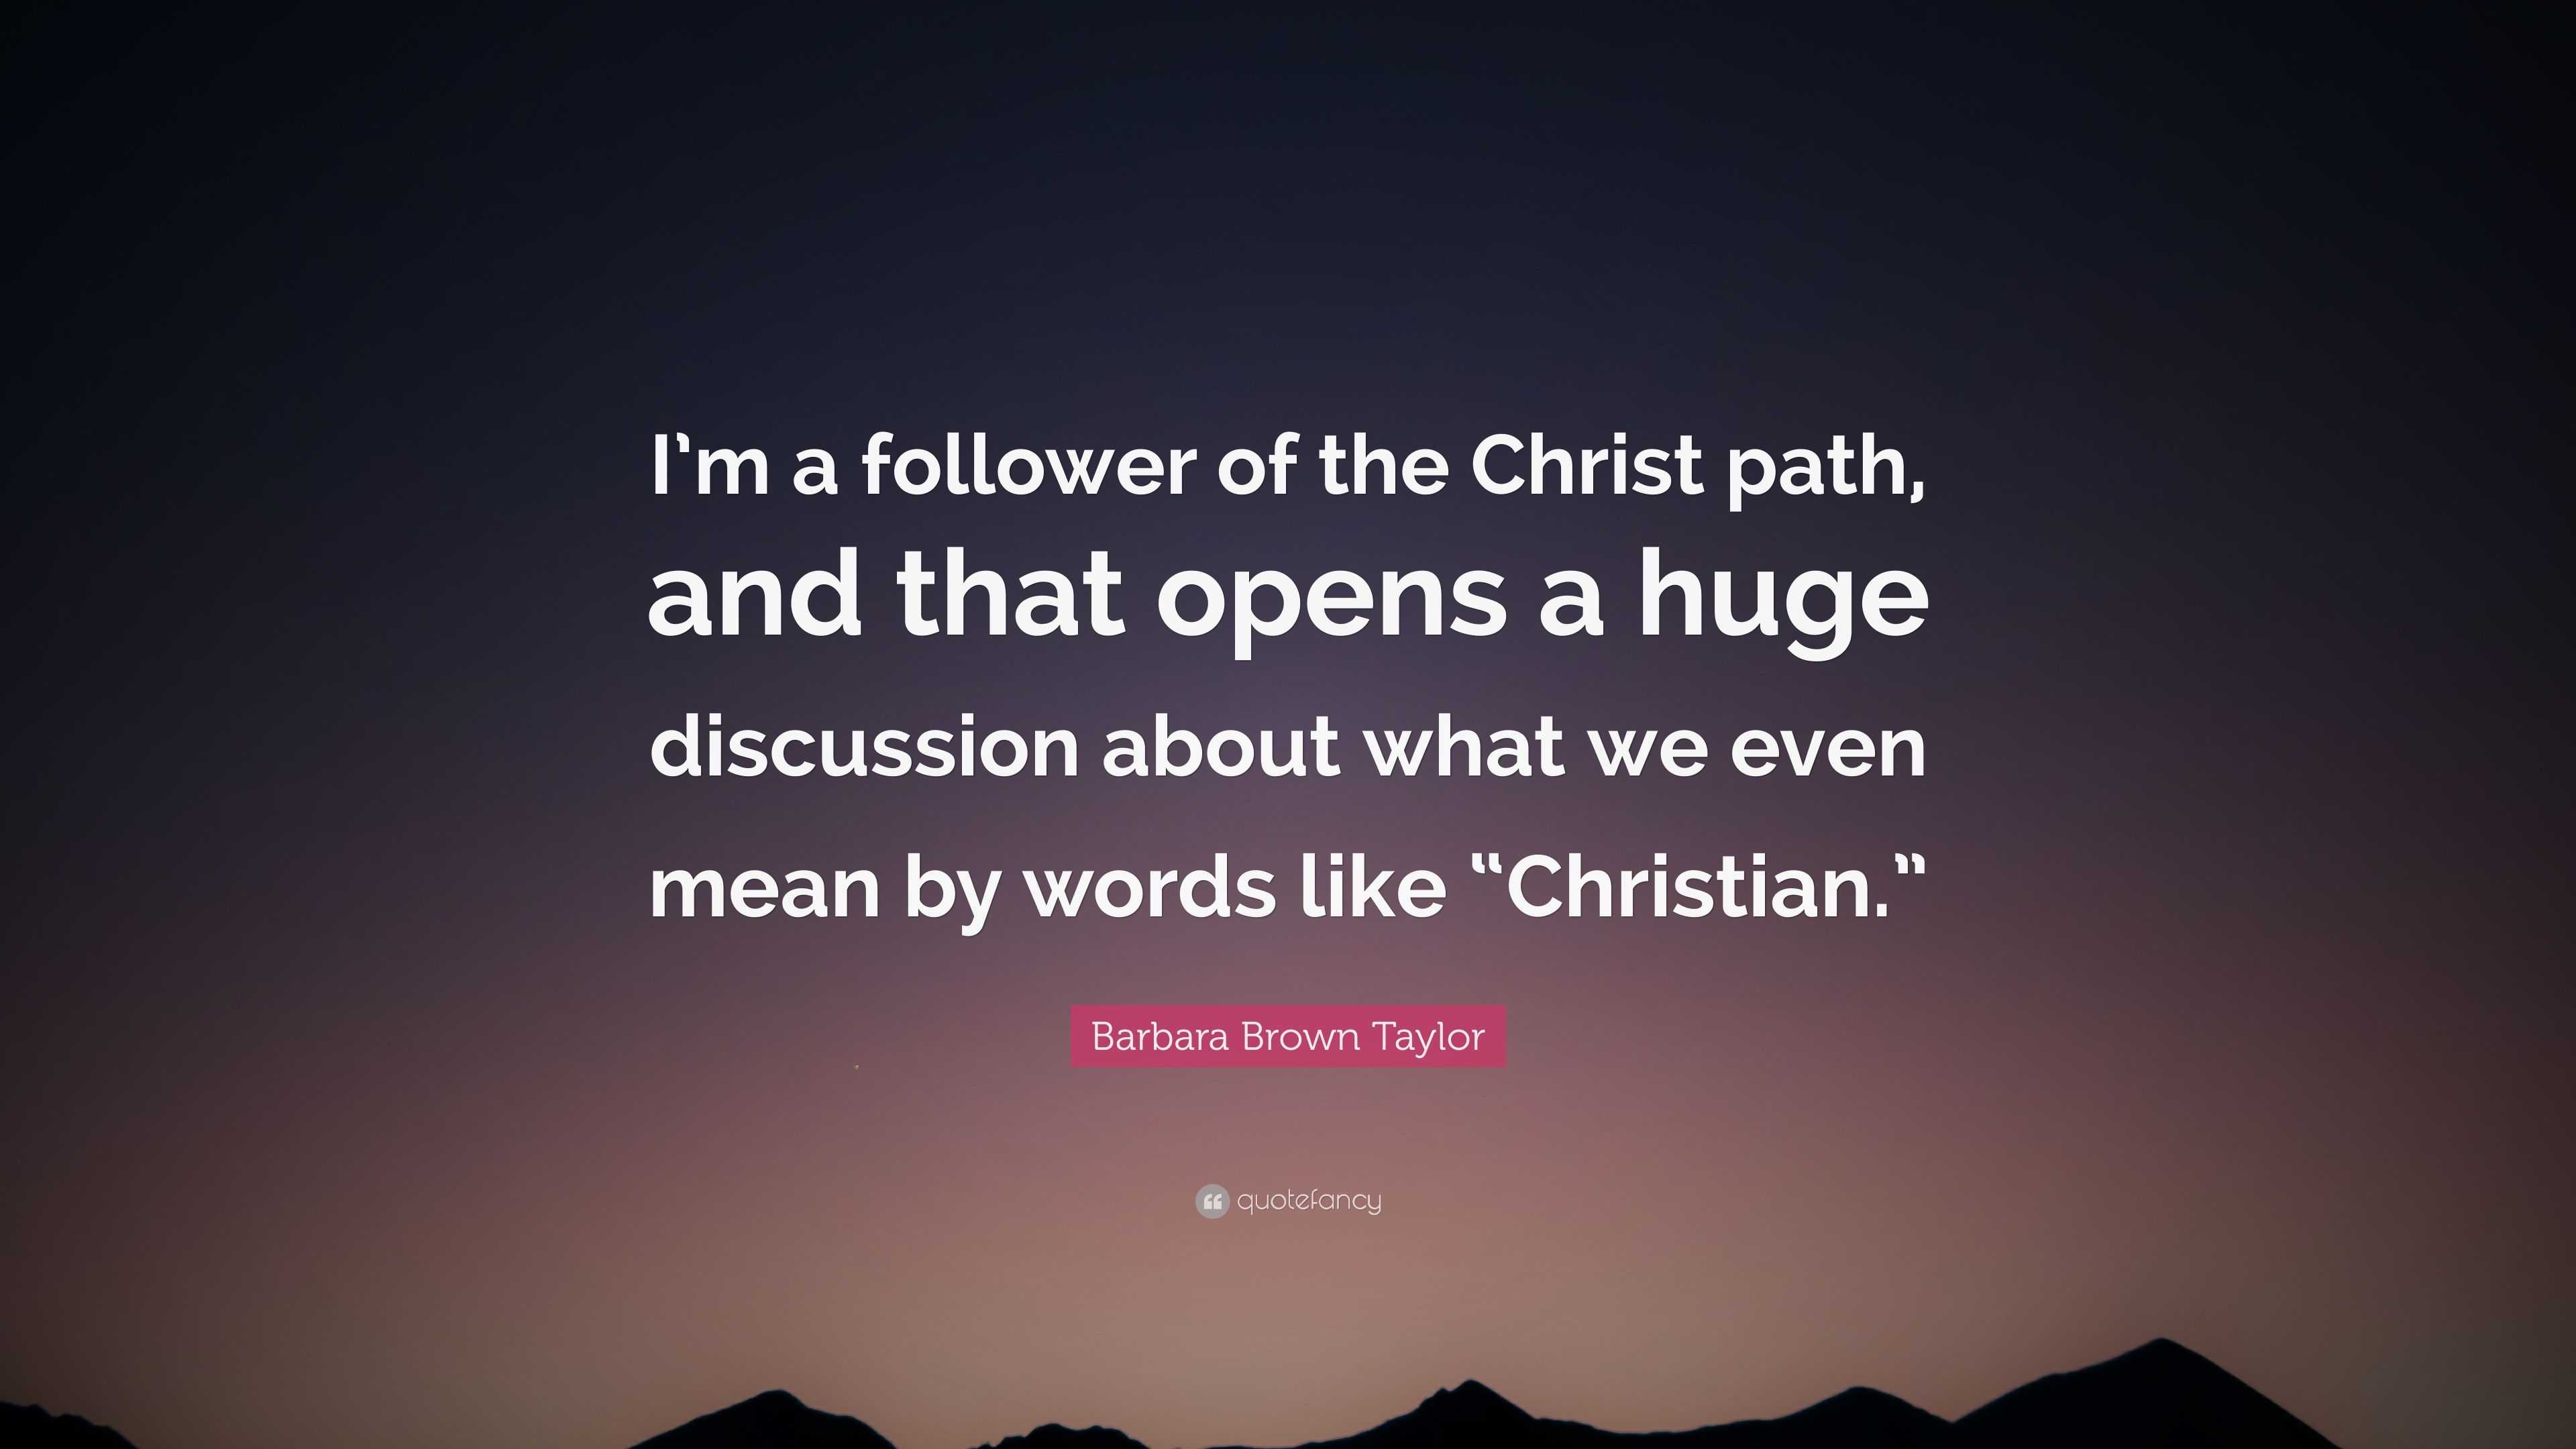 Barbara Brown Taylor Quote: “I’m a follower of the Christ path, and ...